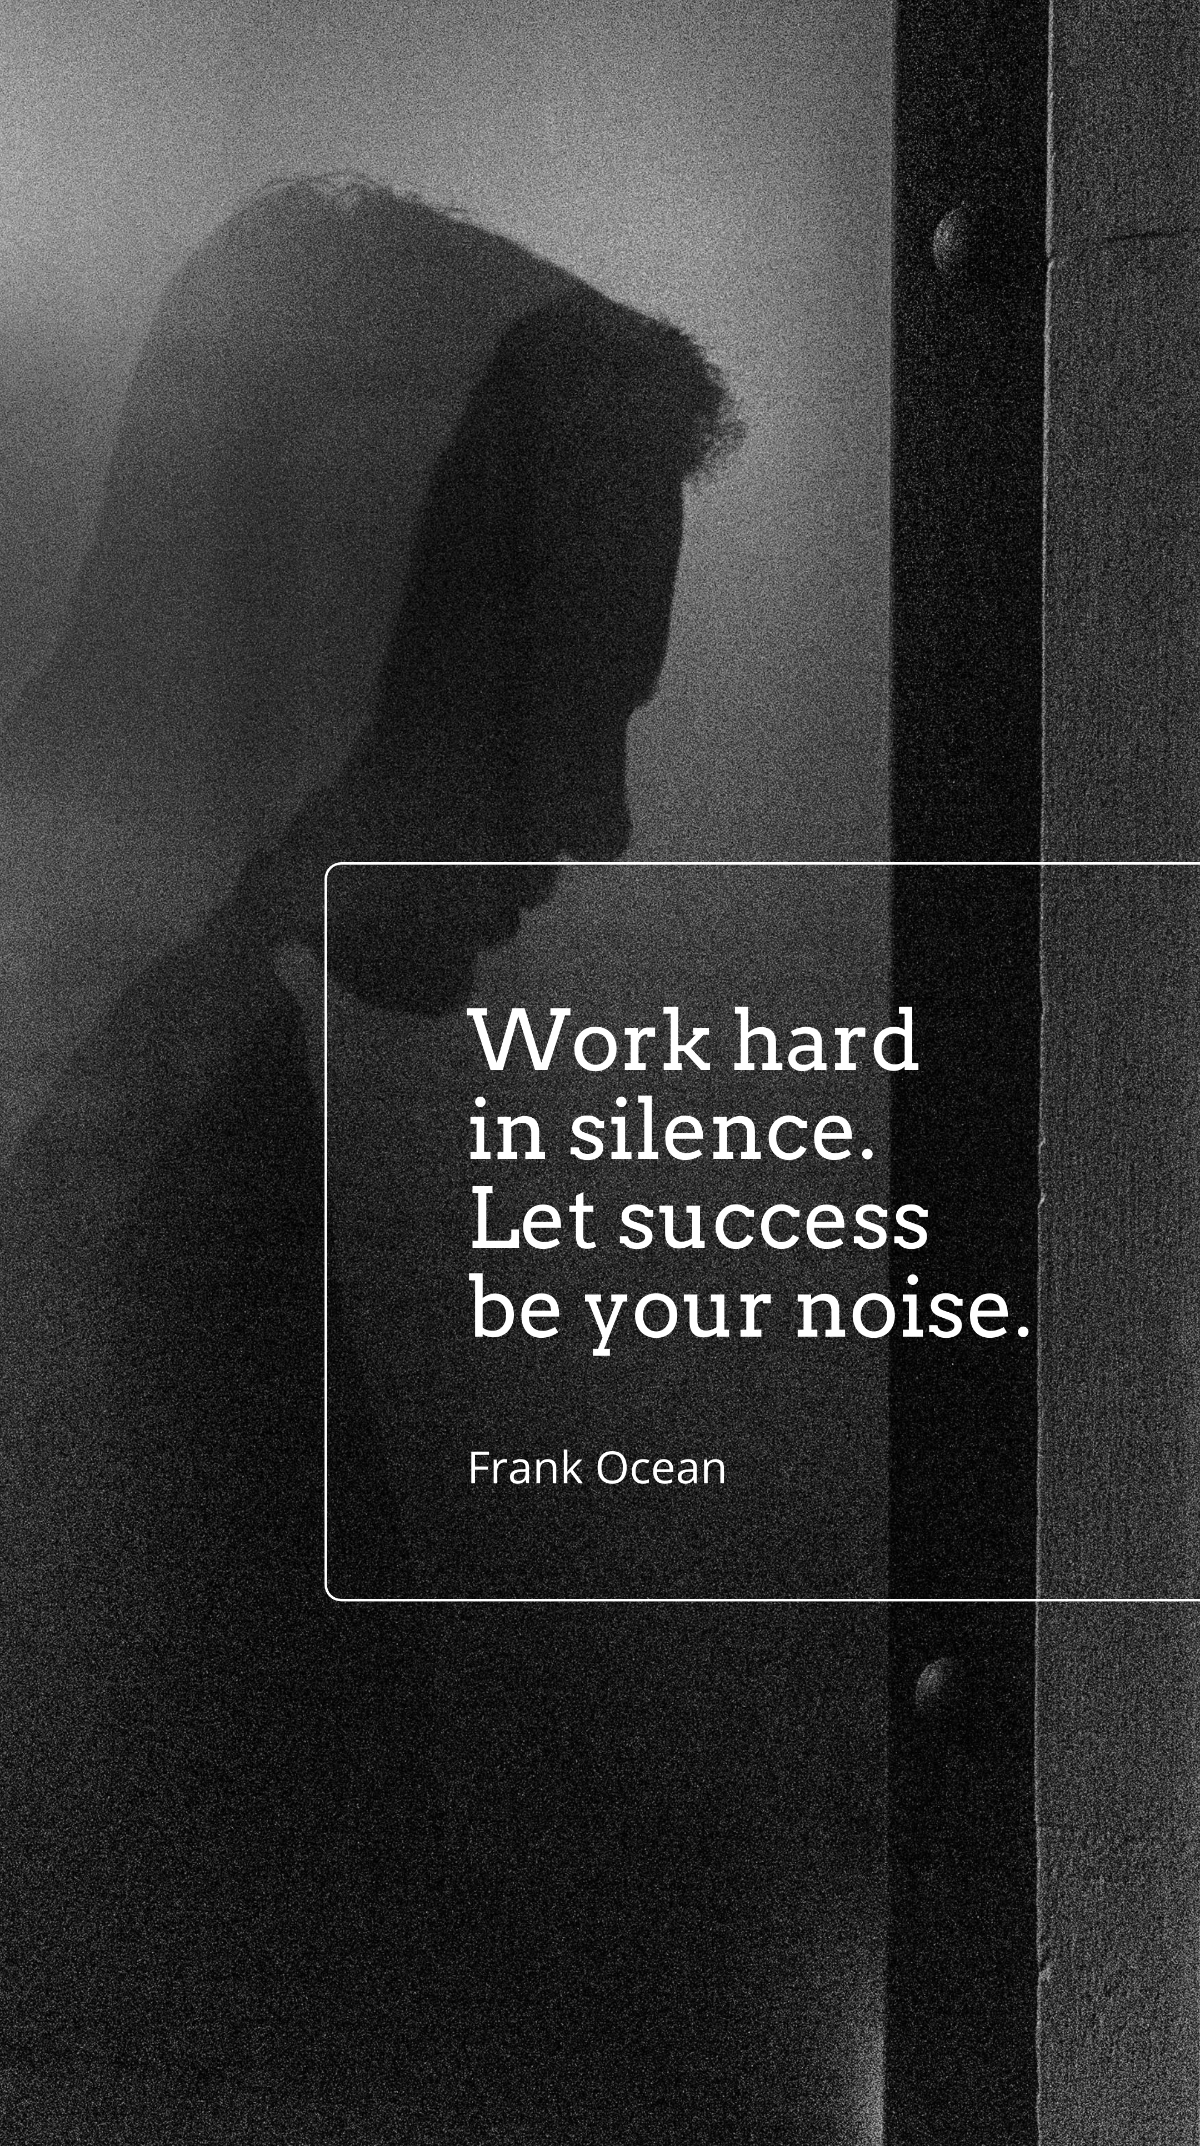 Frank Ocean - Work hard in silence. Let success be your noise. Template